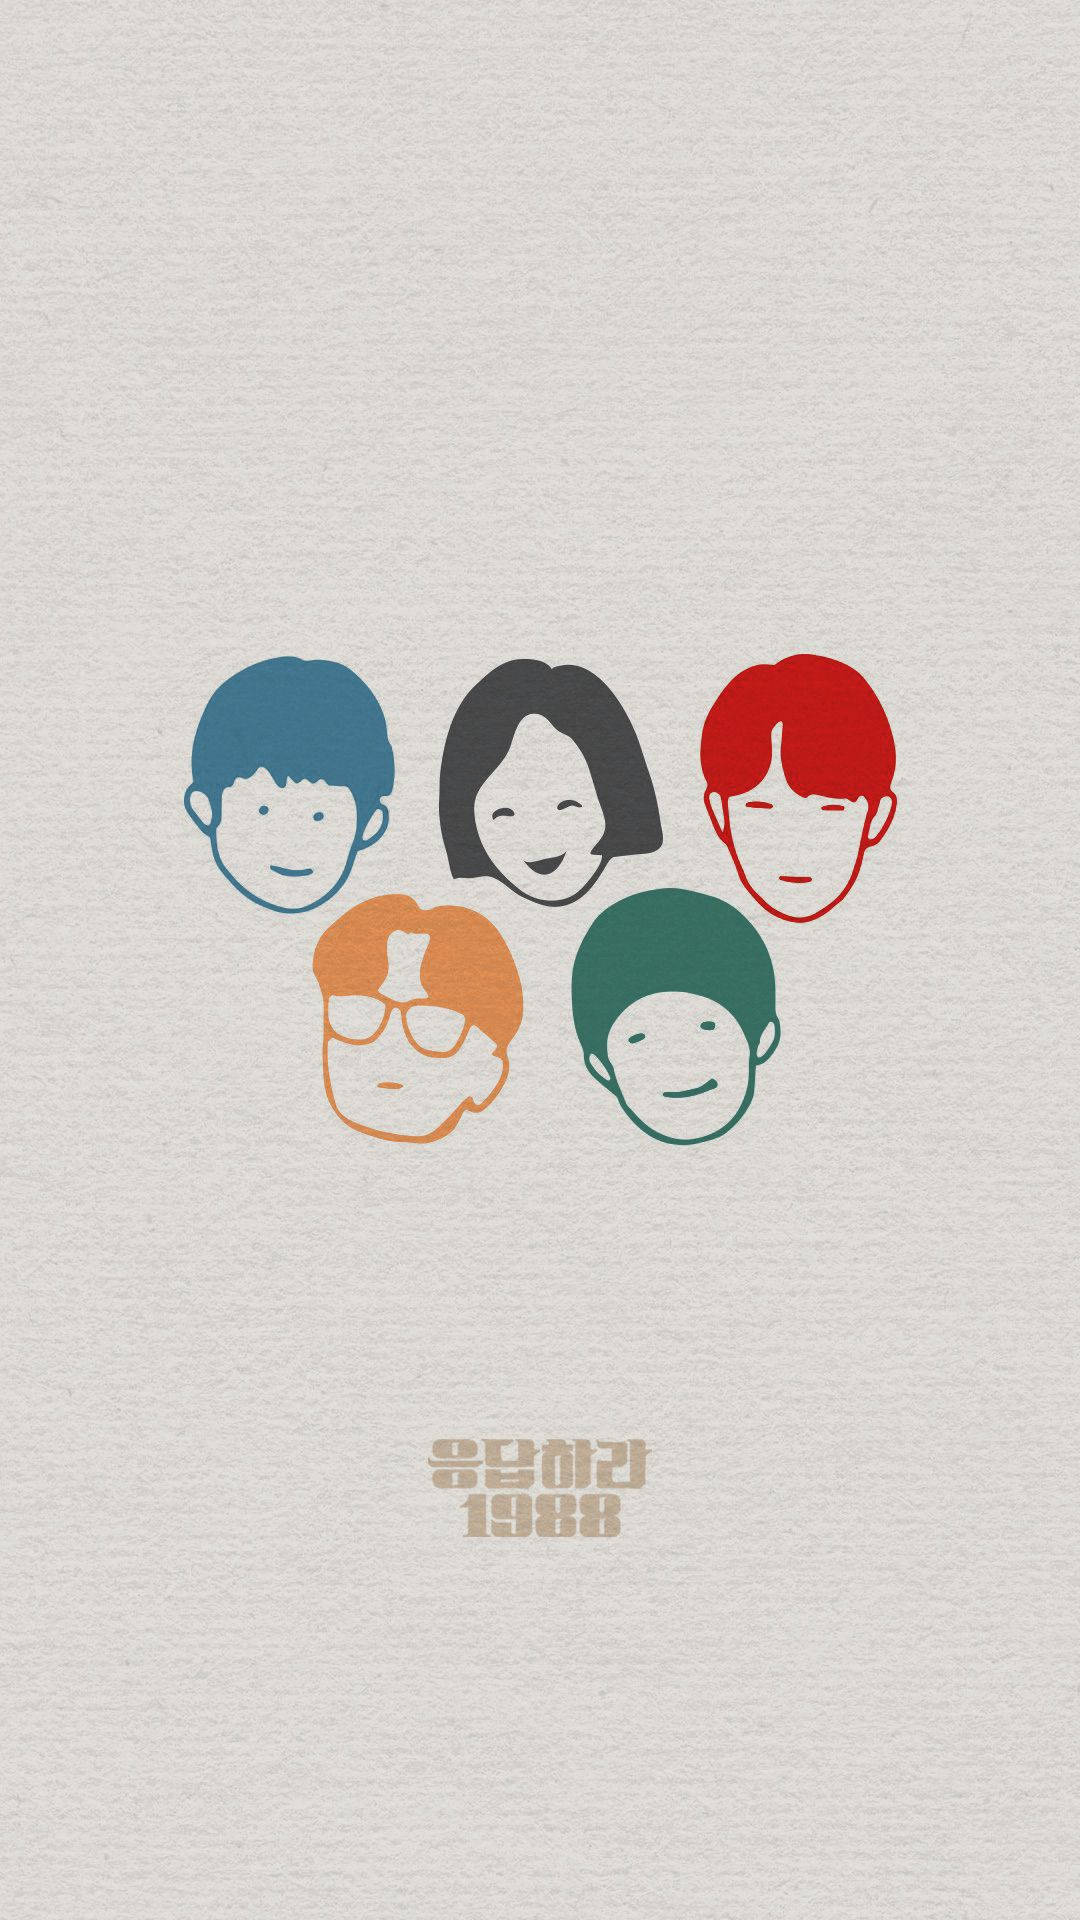 Reply 1988 Face Vector Art Background